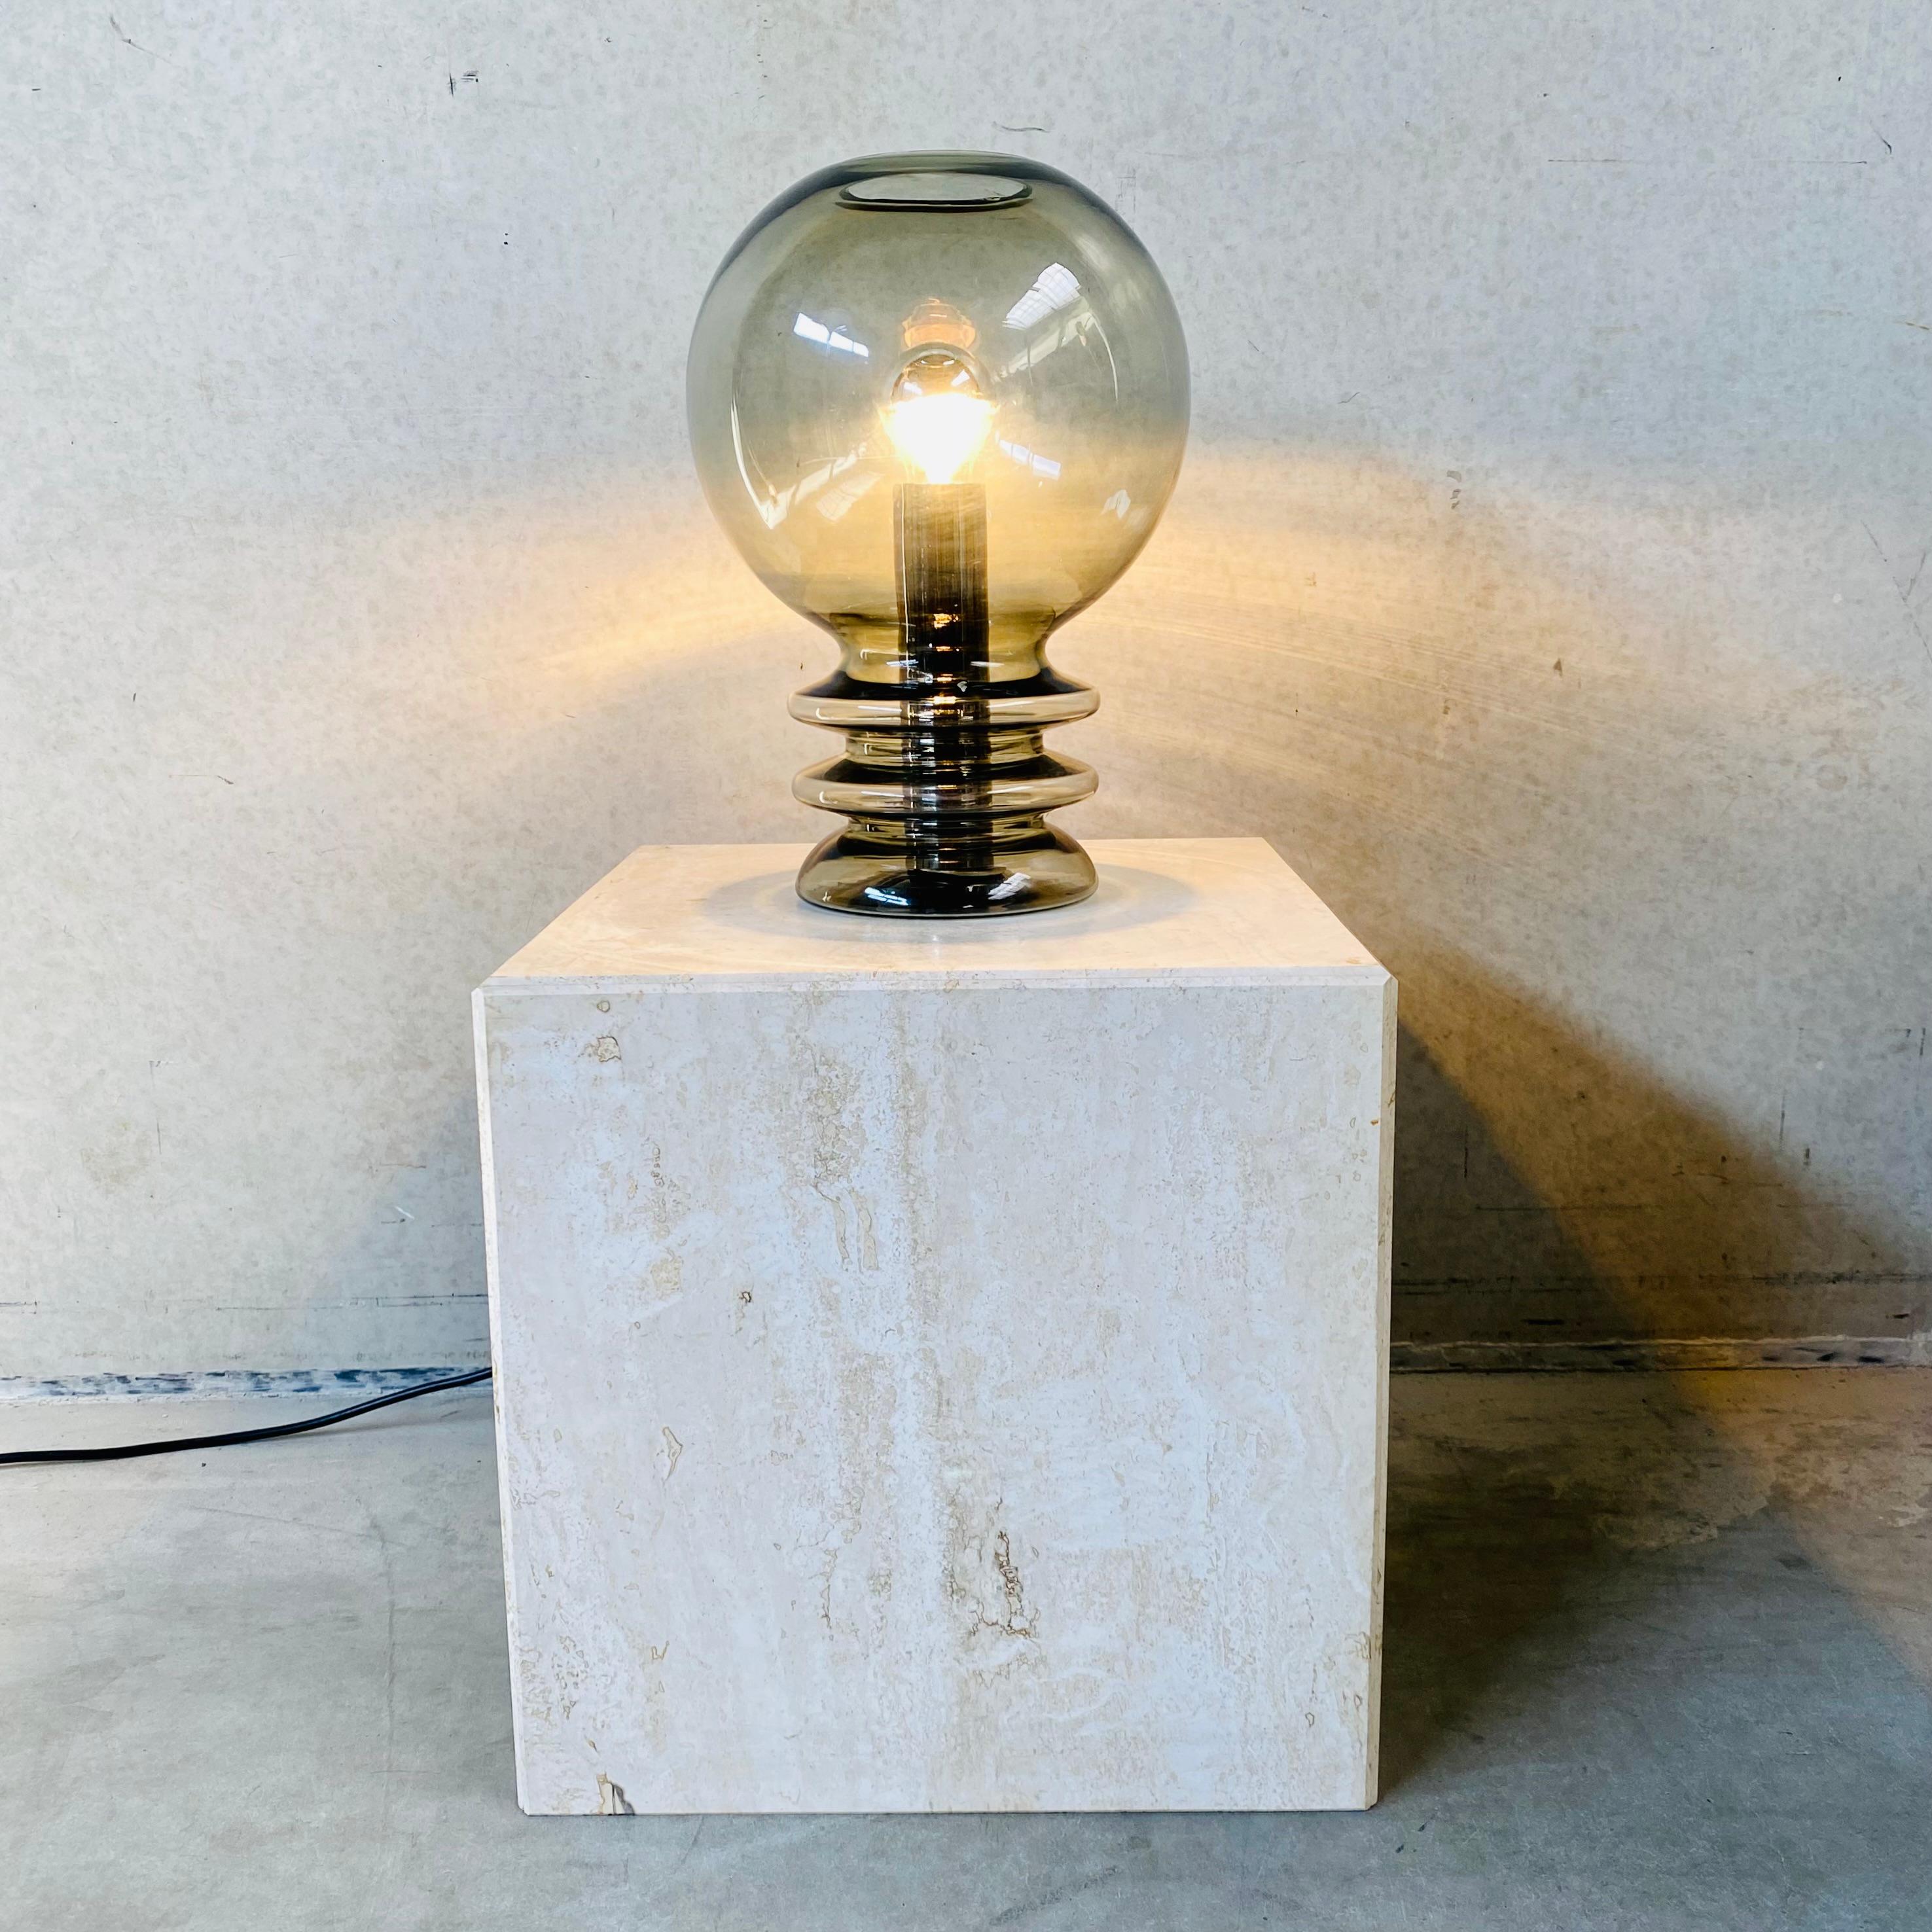 Looking for a unique and stylish lighting option that will add character and elegance to your space? Look no further than the vintage Glasshütte Bulb Moon table lamp.

Crafted in the renowned German Glasshütte region, this table lamp boasts a